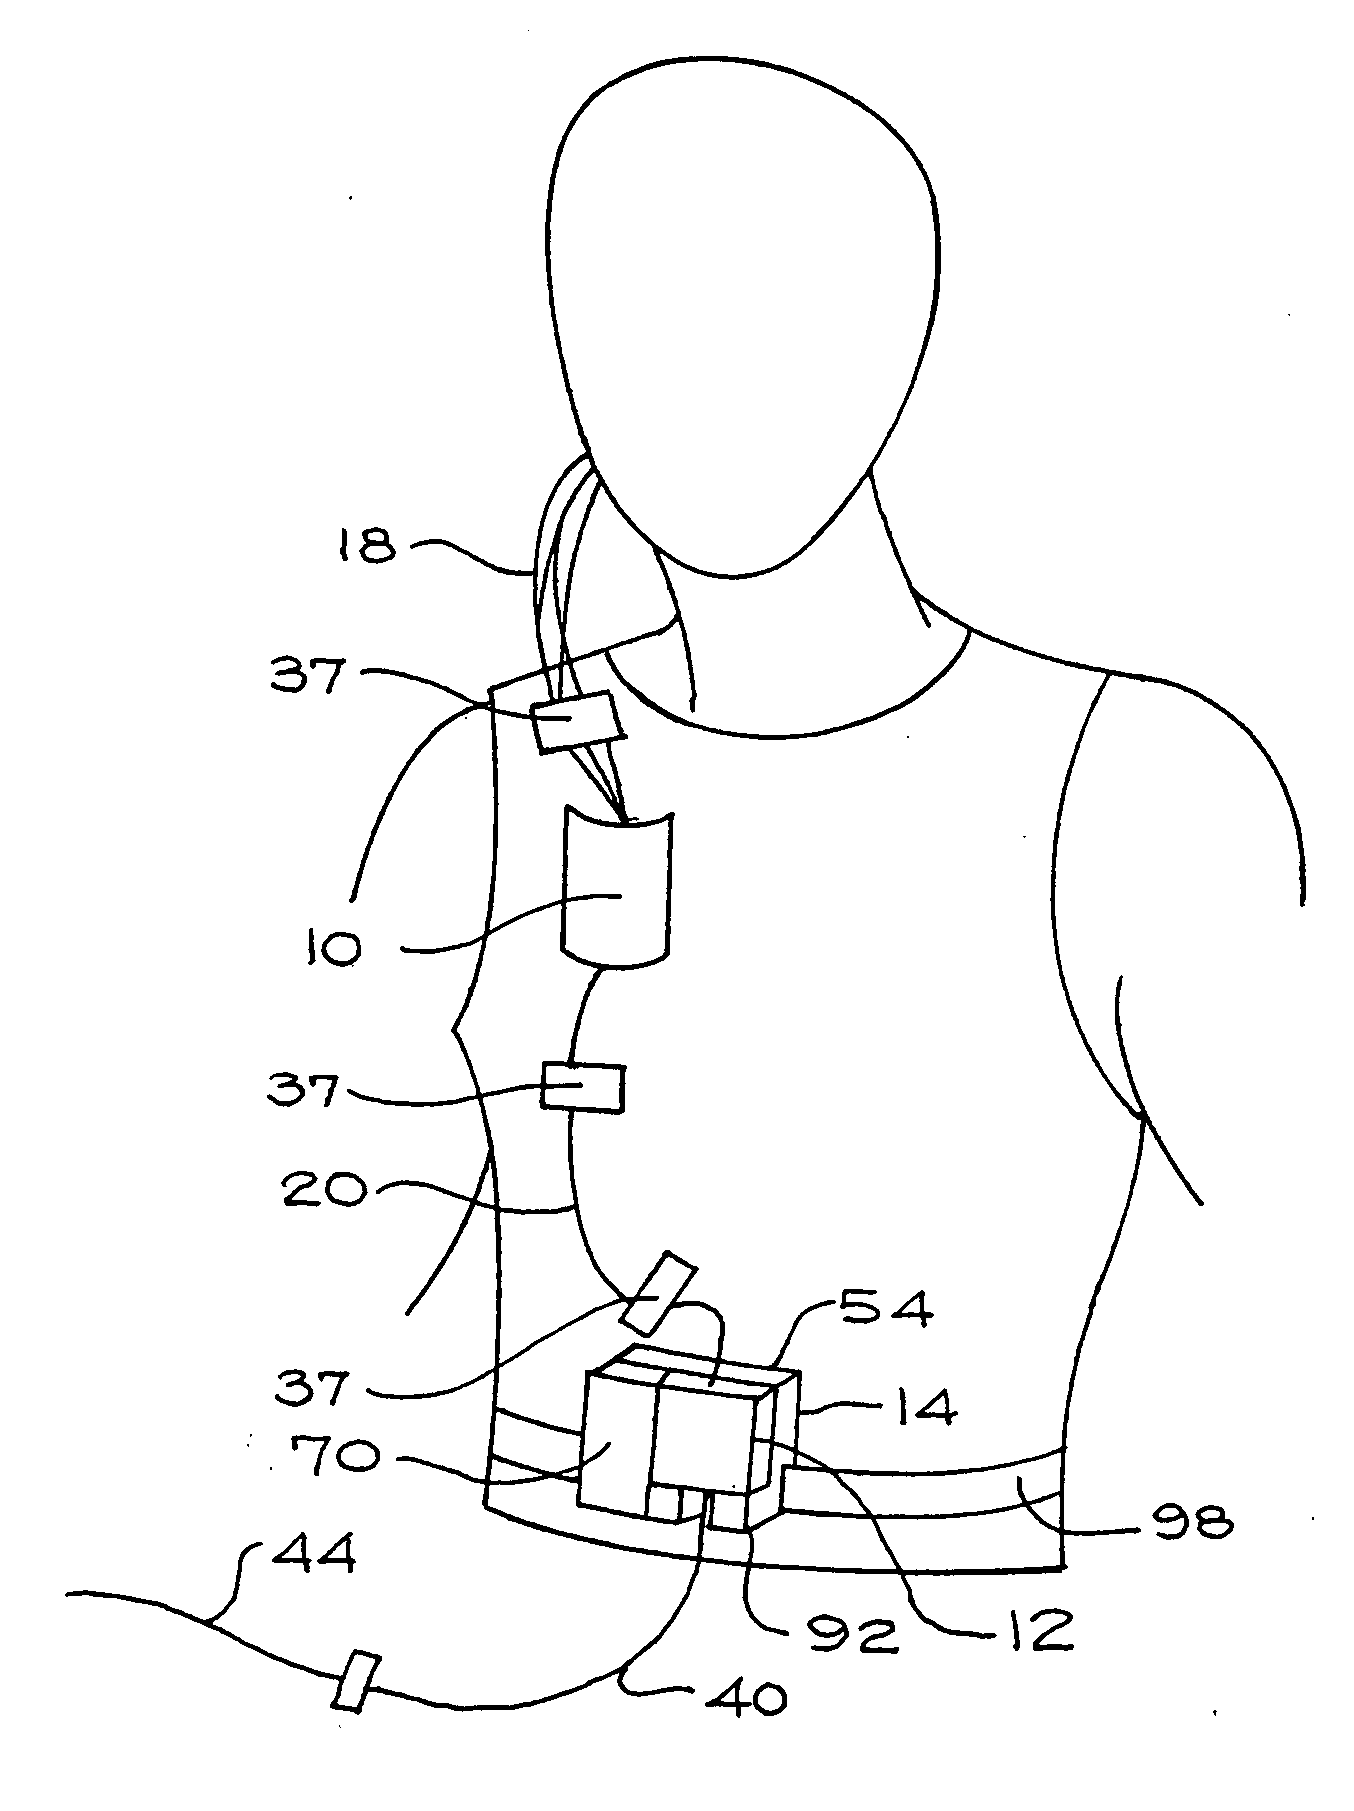 Physiological signal monitoring apparatus and method